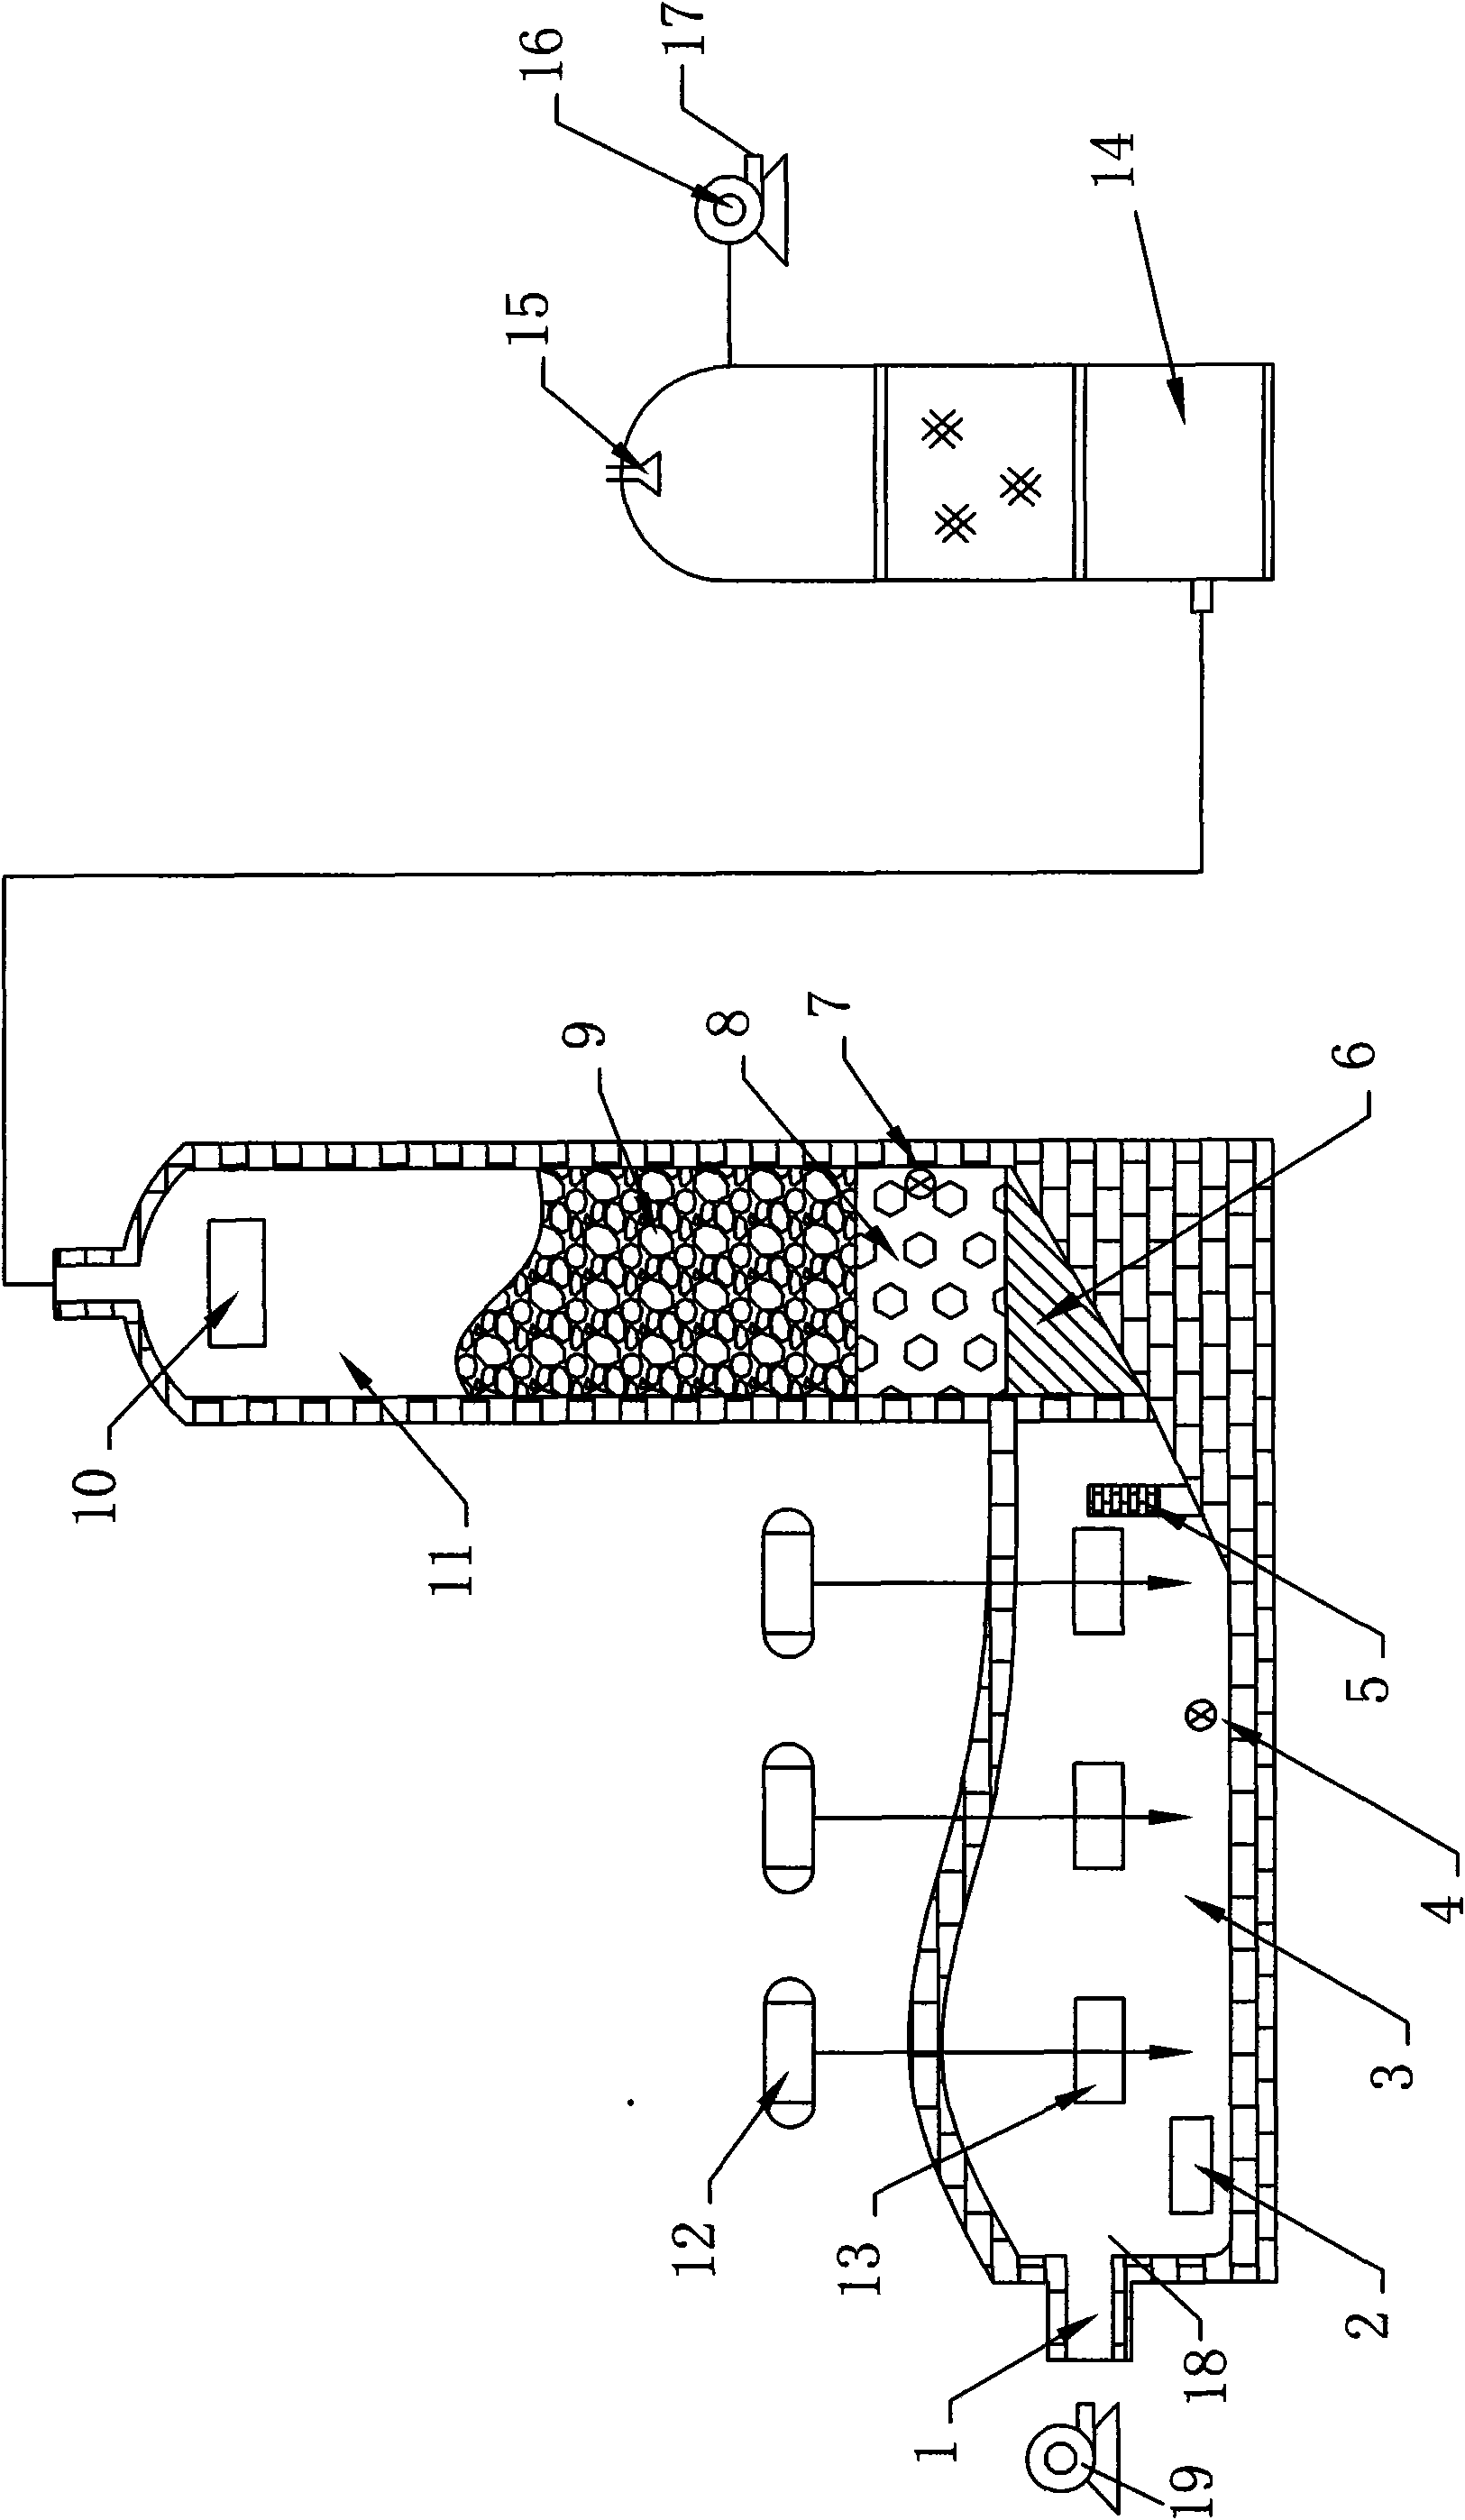 Semi-vertical reverberatory furnace for preparing sodium sulfide and process thereof